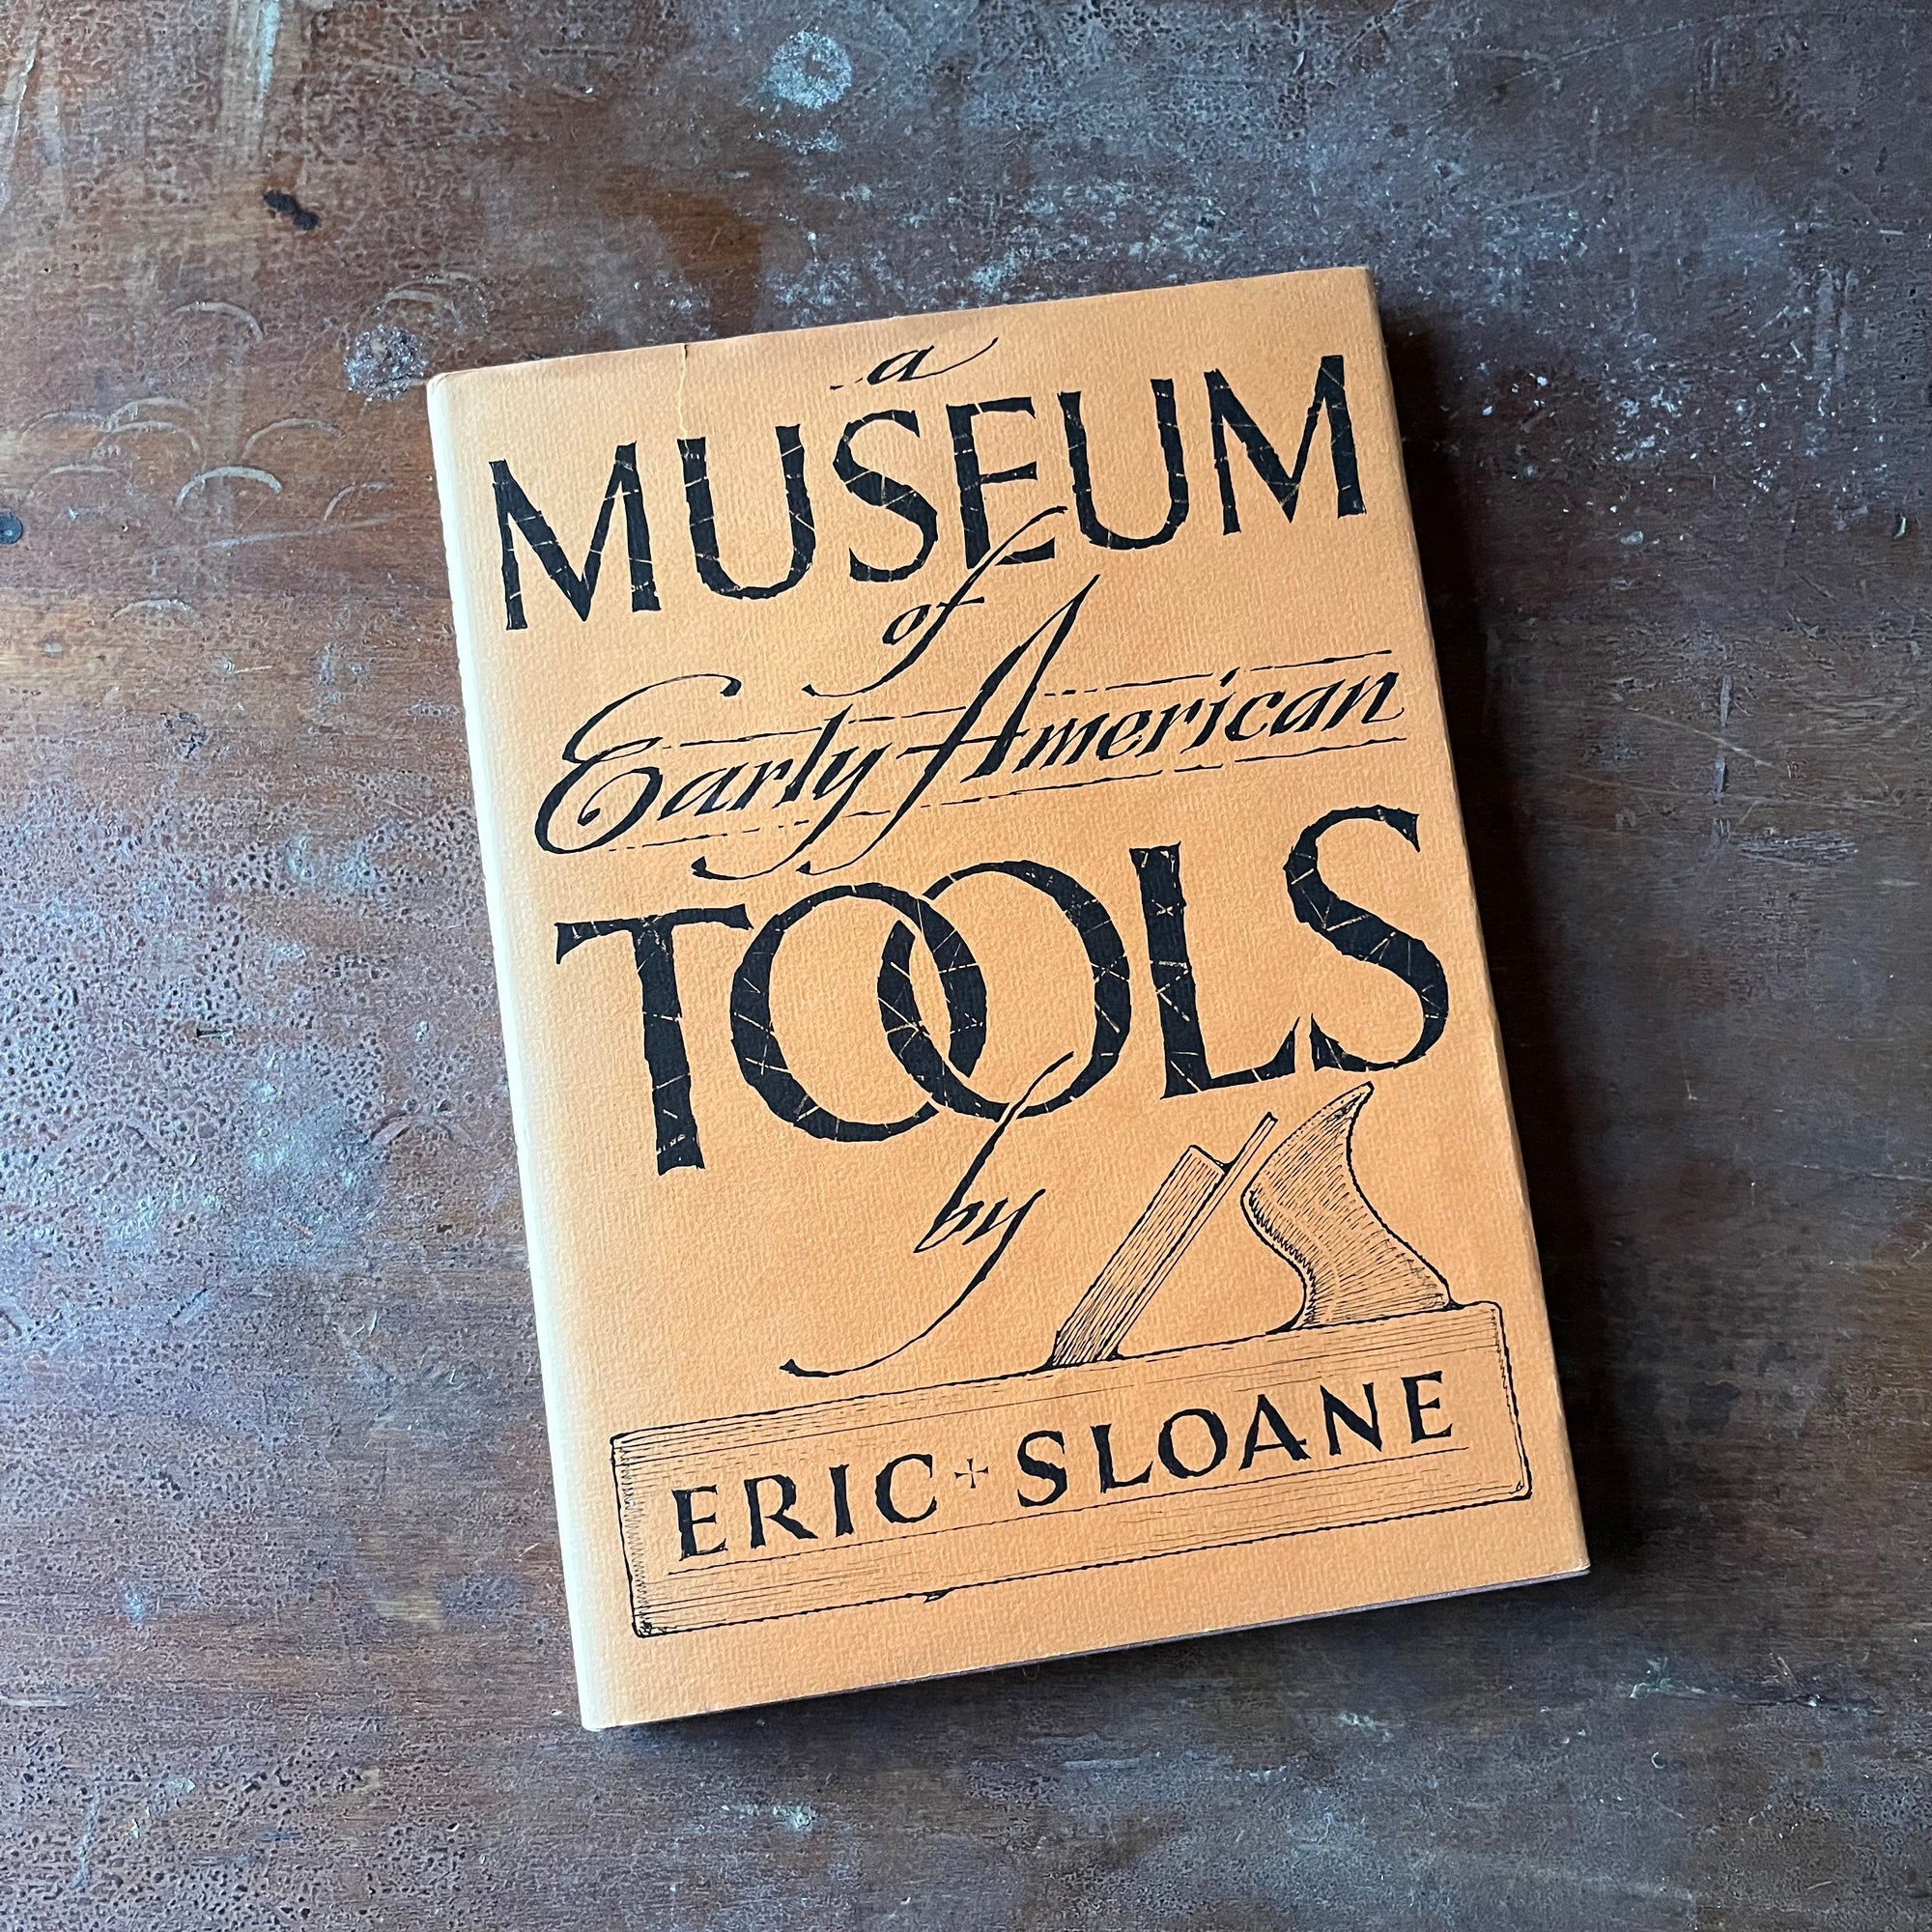 Log Cabin Vintage - vintage book, vintage history book, vintage art book - A Museum of Early American Tools written and illustrated by Eric Sloane - 1964 Edition with Dust Jacket - view of the dust jacket's front cover